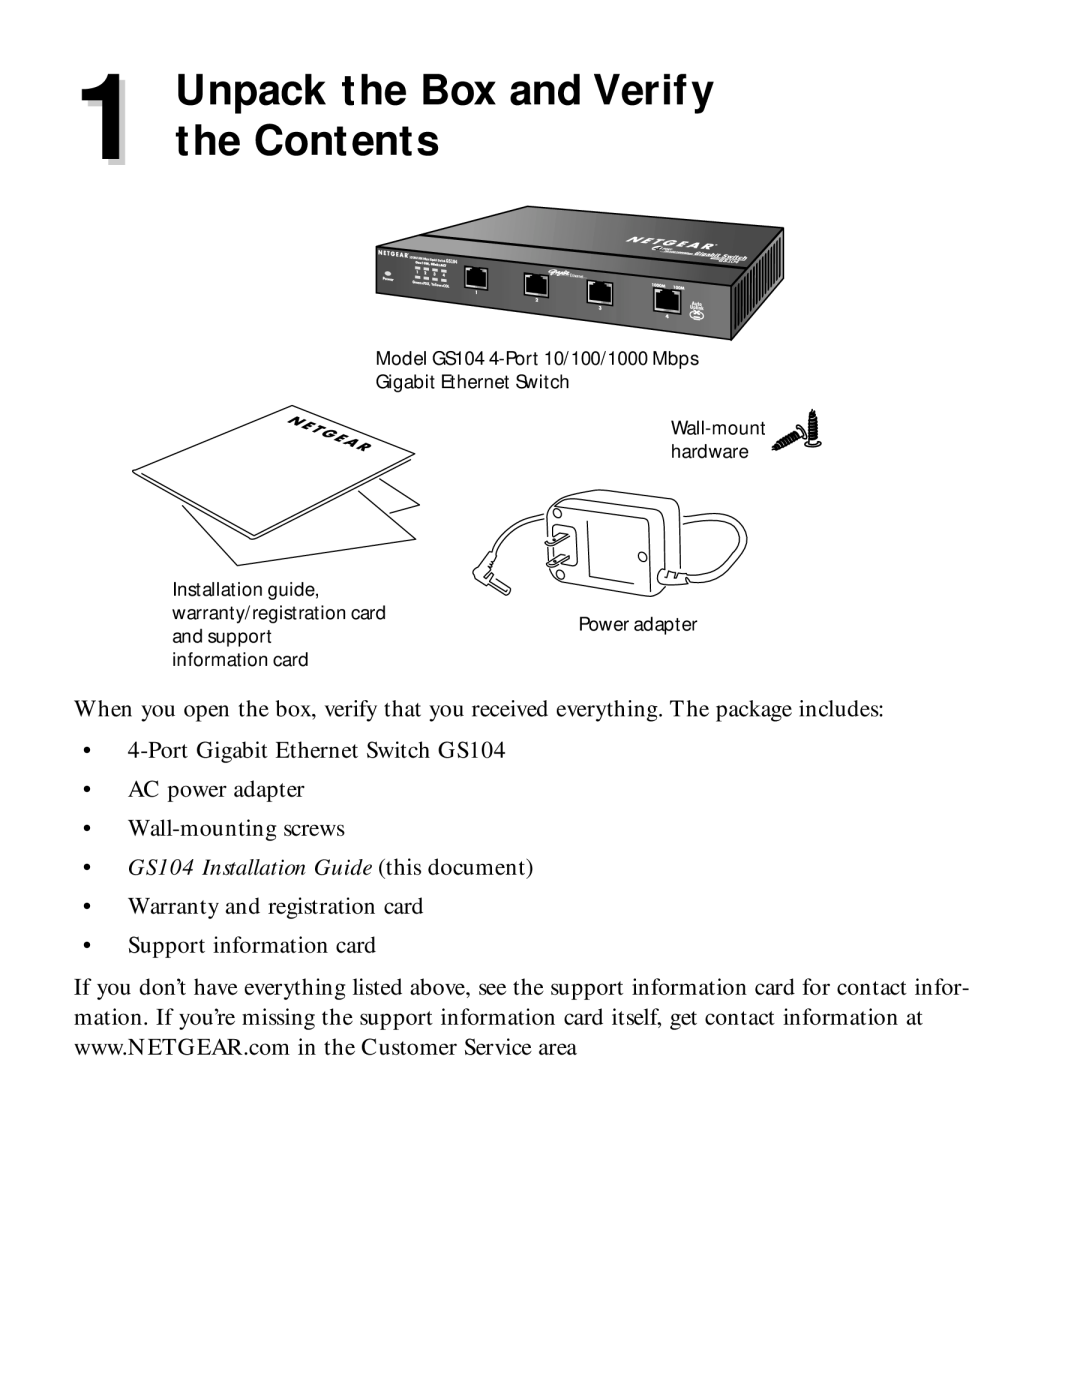 NETGEAR manual Unpack the Box and Verify 1 the Contents, GS104 Installation Guide this document 